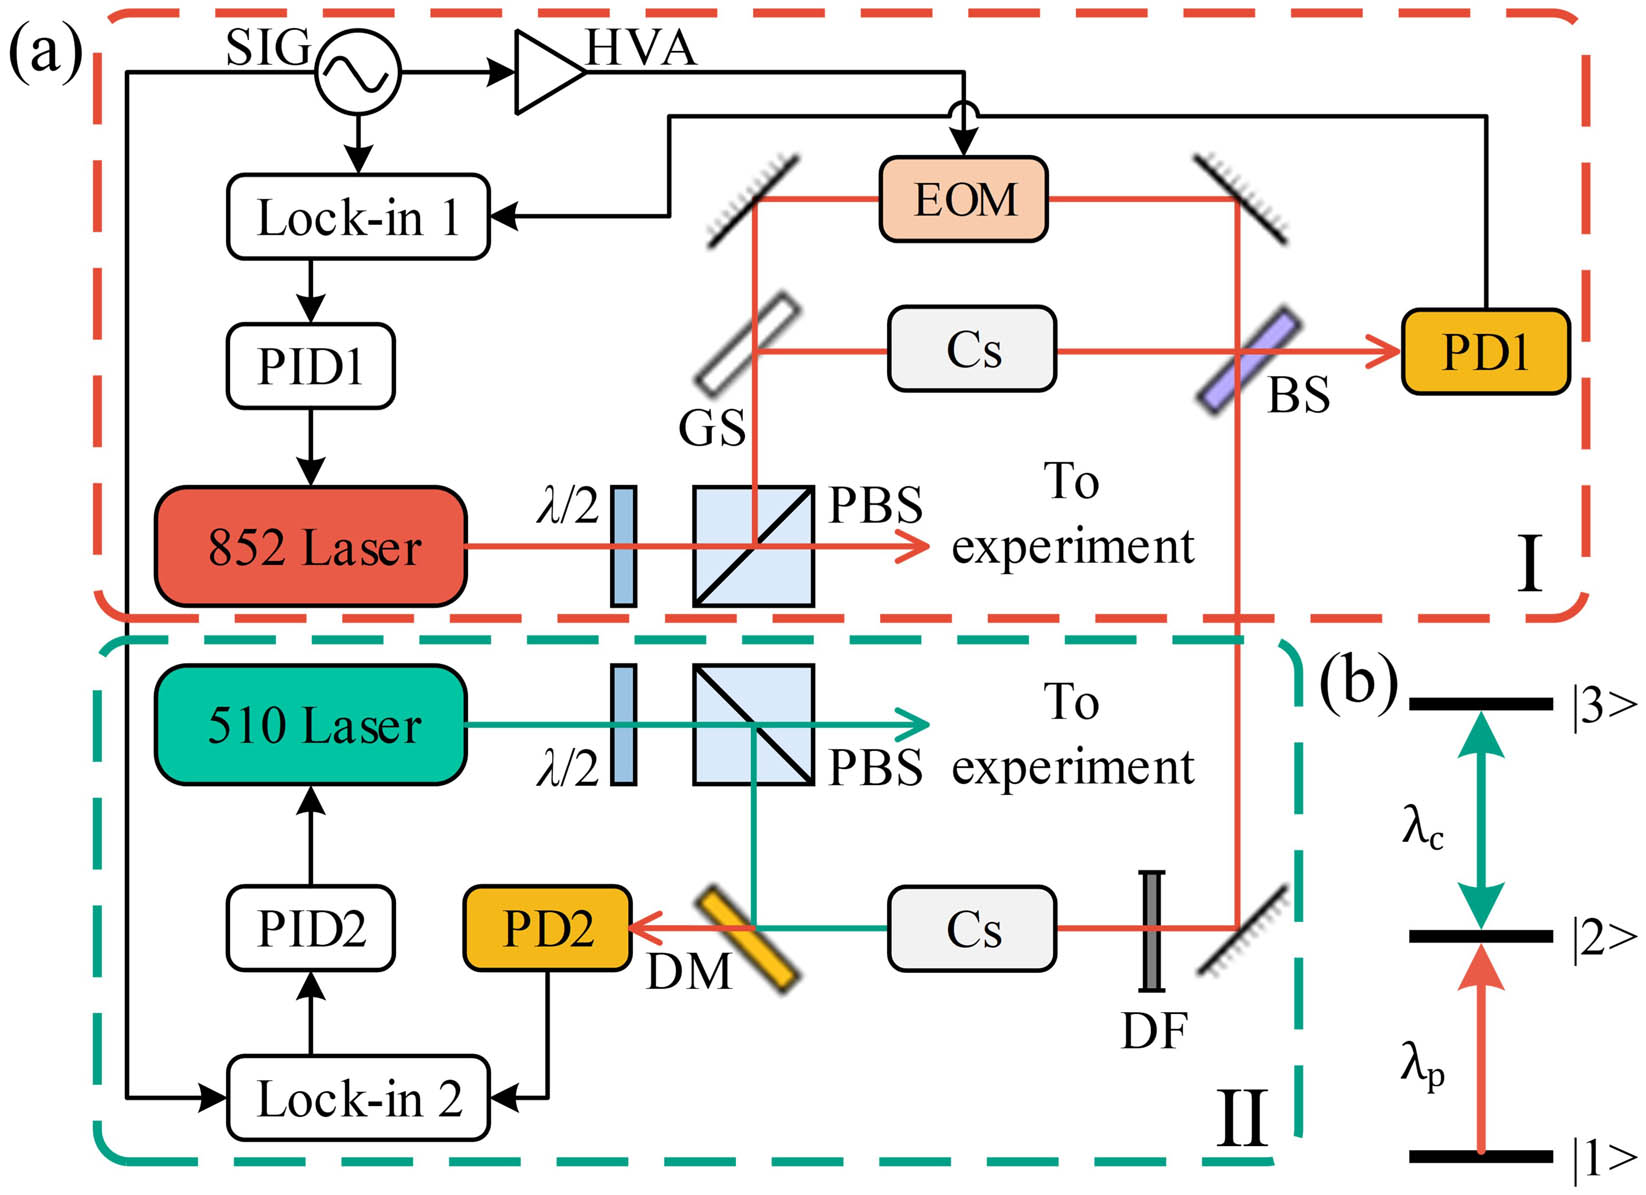 Illustration of experimental scenarios and energy-level diagram. (a) Diagram of the experimental setup. Zone I is the scheme of the 852 nm probe laser frequency-locking process using the modulated transfer spectral signal. Zone II is the scheme of the 510 nm coupling laser frequency-locking process using the modulated Rydberg EIT signal. These two zones are connected by a typical frequency-modulated probe beam and a 20 kHz sinusoidal signal generated by the same SIG. λ/2, half-wave plate; PBS, polarizing beam splitter; GS, thick glass slide; BS, beam splitter; DF, density filter; DM, dichroic mirror; PD, photodetector; HVA, high-voltage amplifier. (b) Energy-level diagram of the Rydberg EIT ladder scheme consisting of the ground state |1〉 (6S1/2, F = 4), the intermediate state |2〉 (6P3/2, F′ = 5), and the Rydberg state |3〉 (42D5/2).